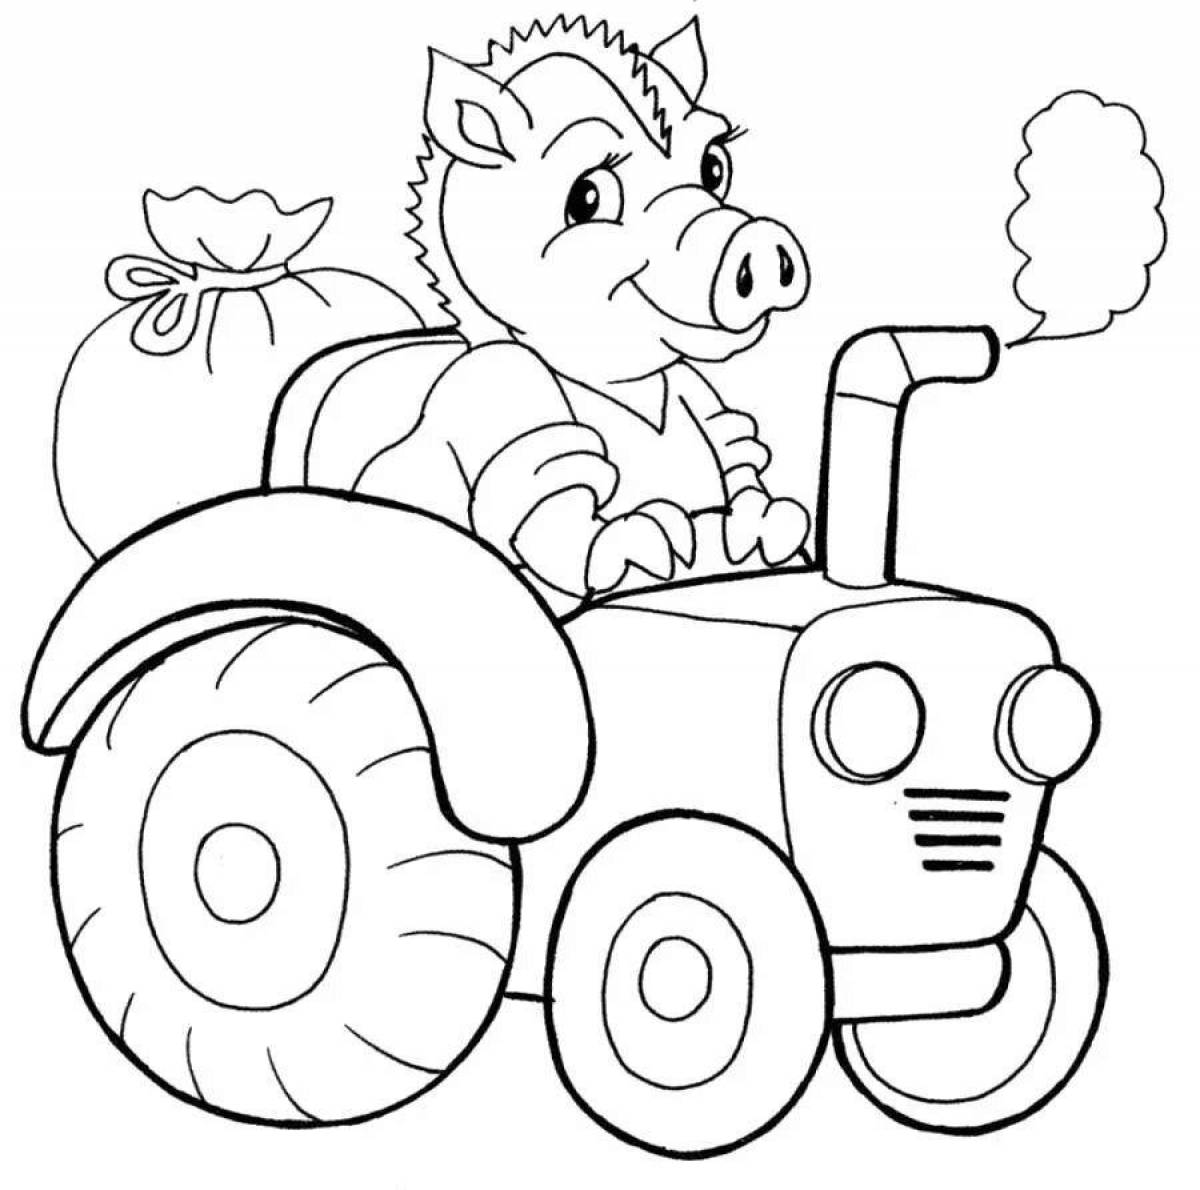 Fun animal coloring book for 3 year old boys